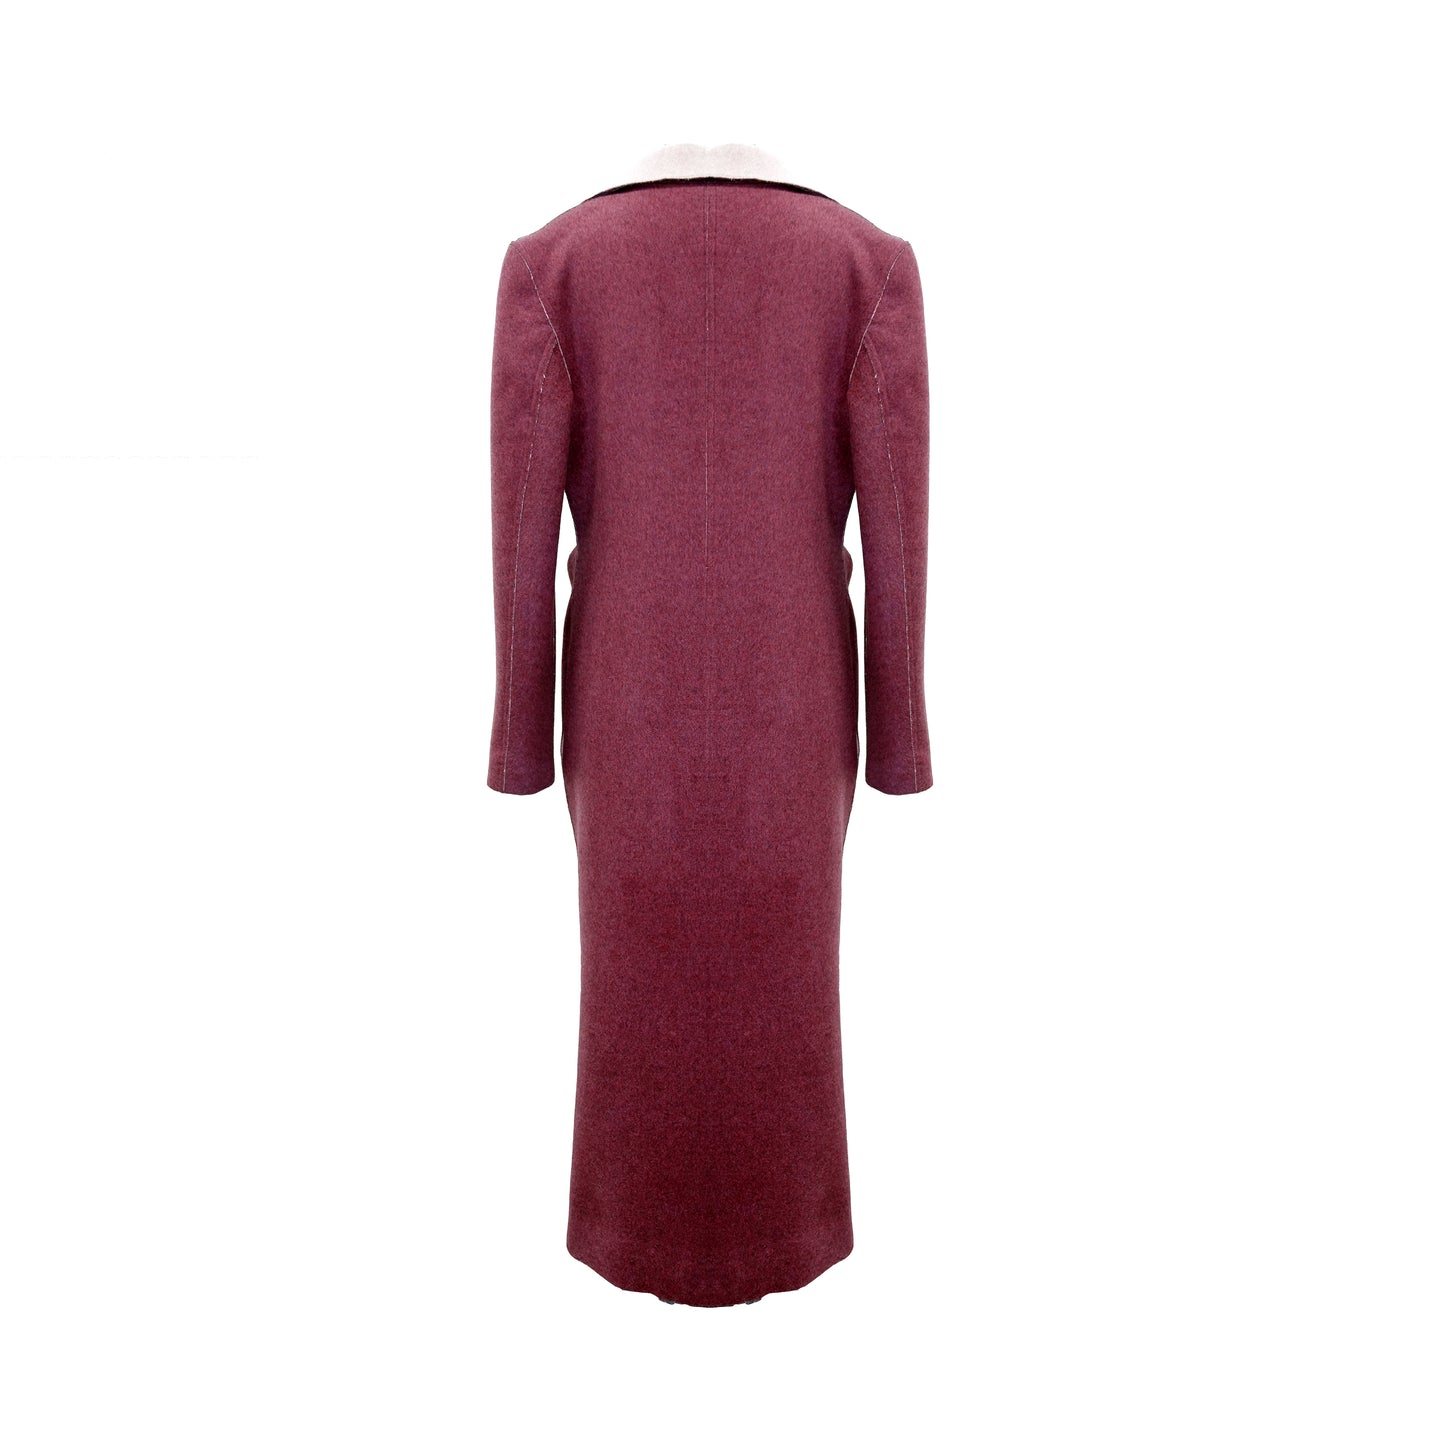 Back of tailored look double-face wool and cashmere blend raspberry pink coat